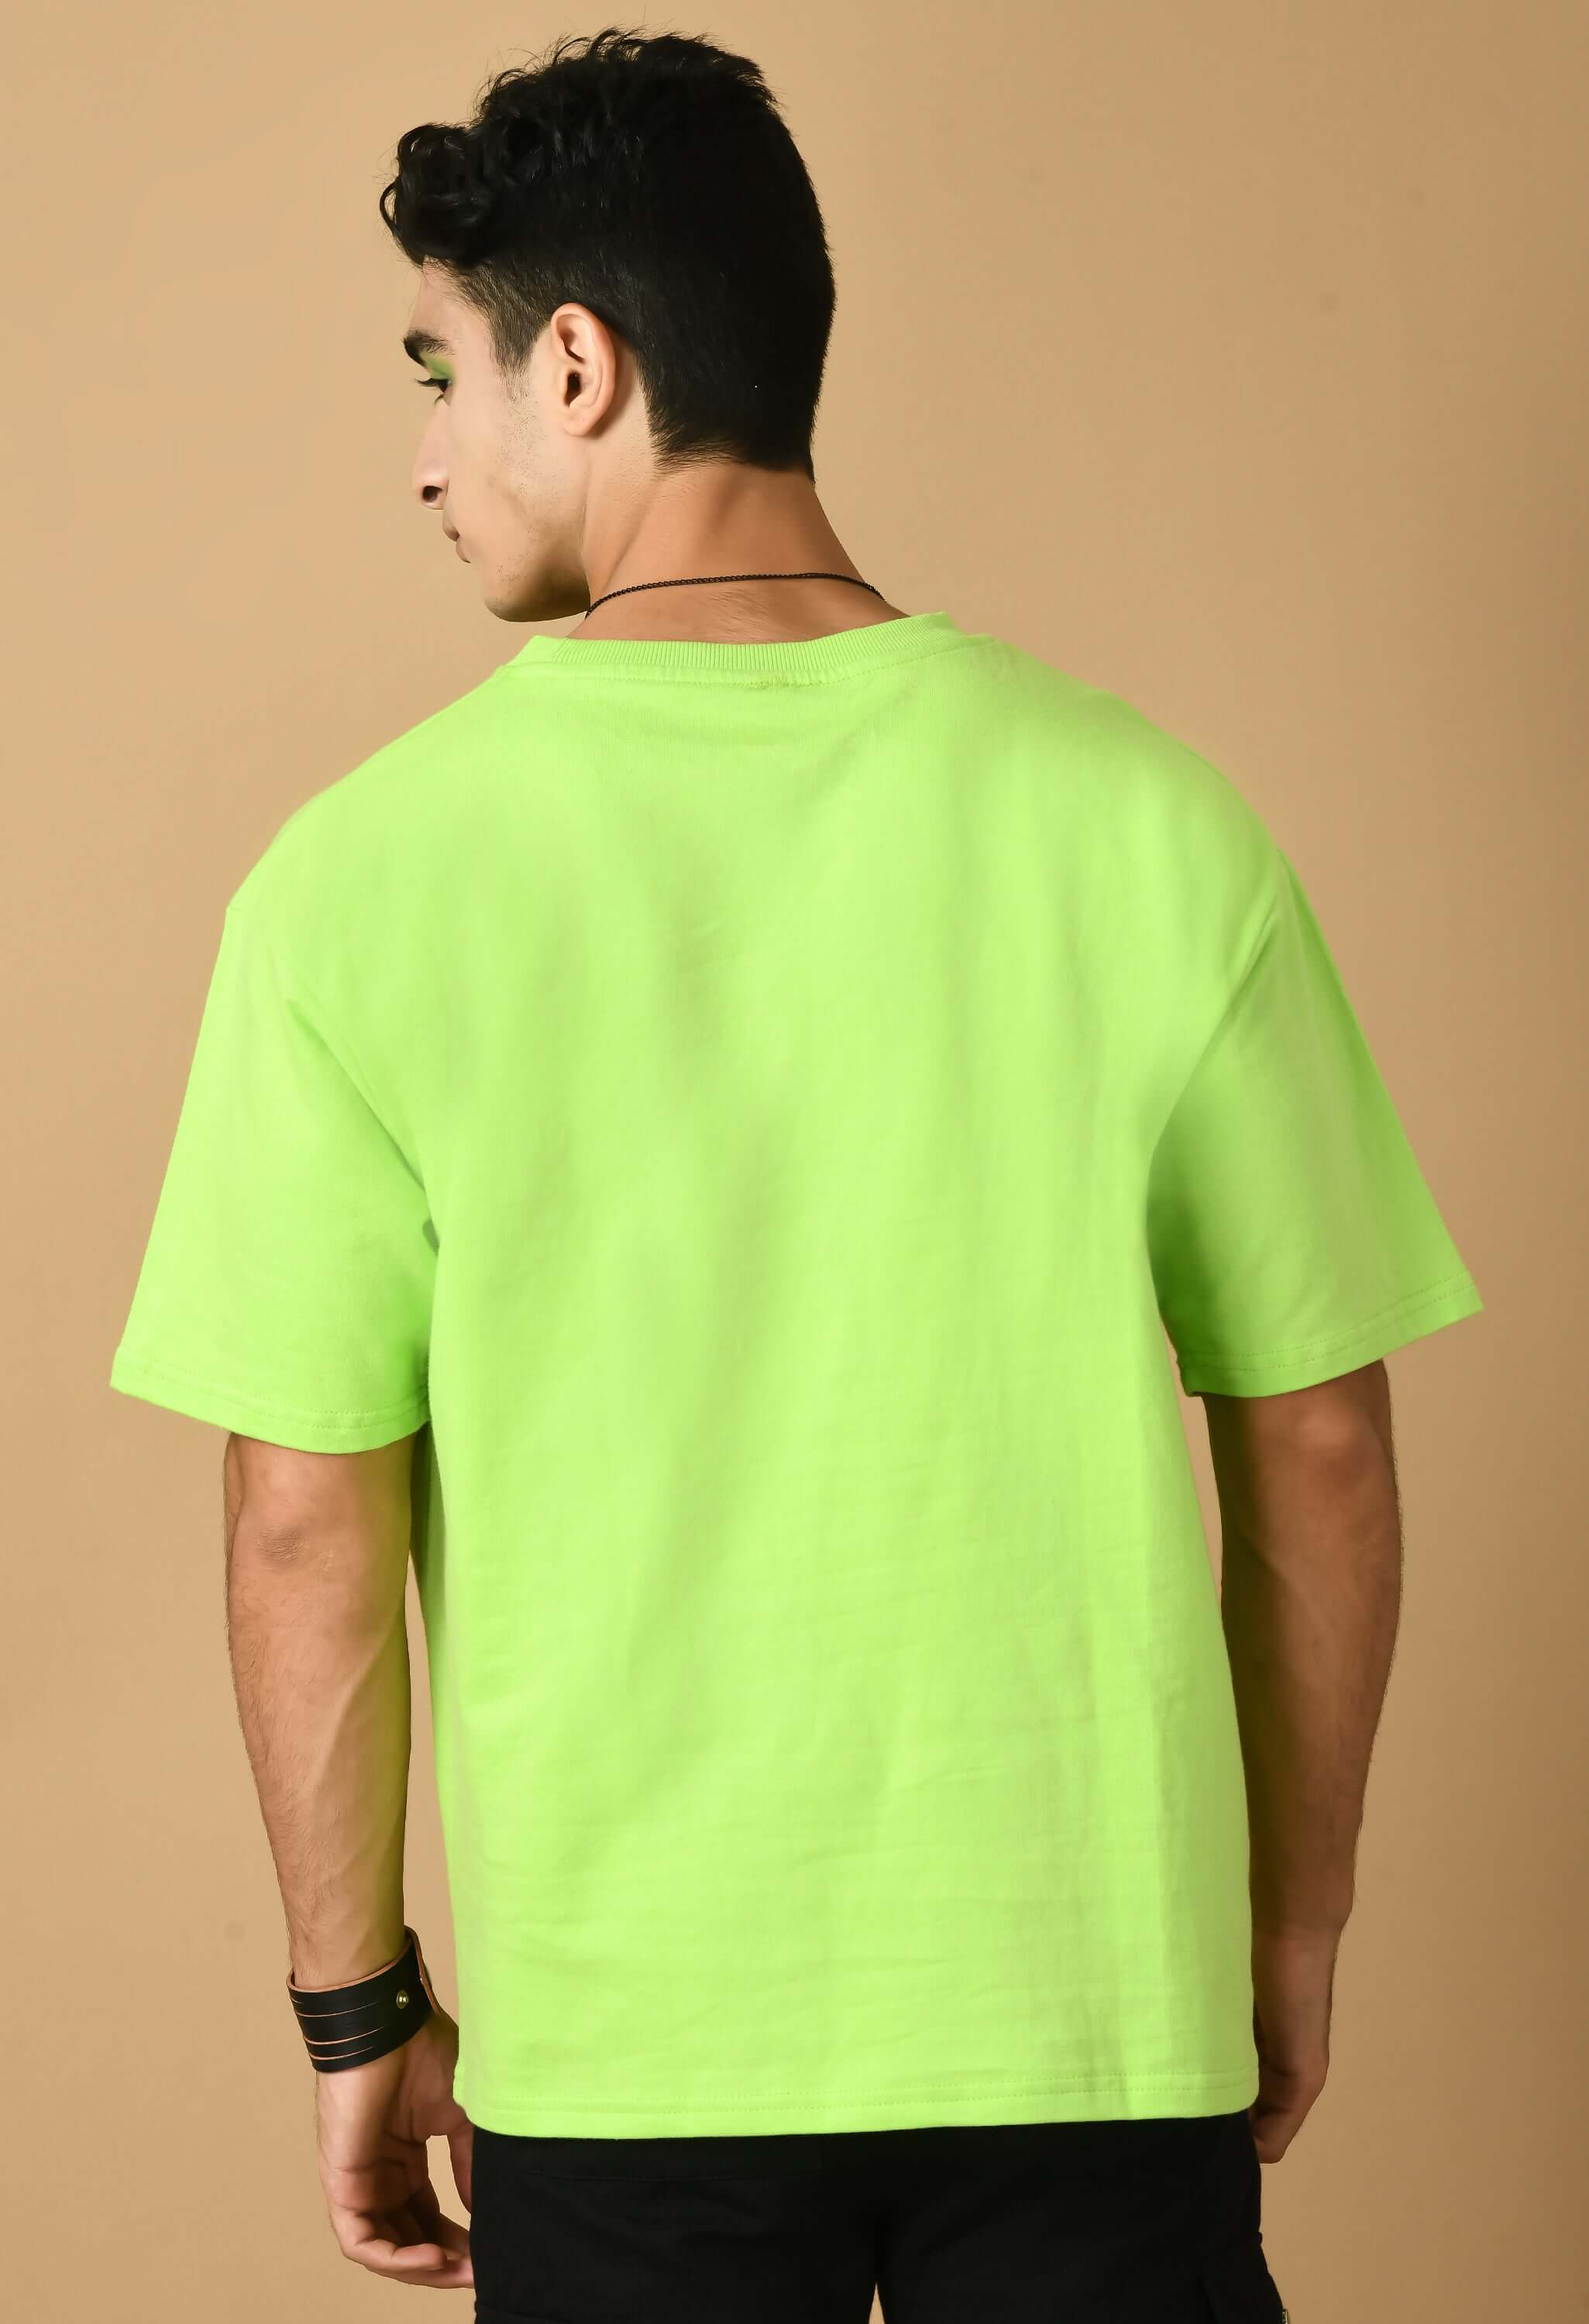 Virtue printed green color oversized t-shirt 